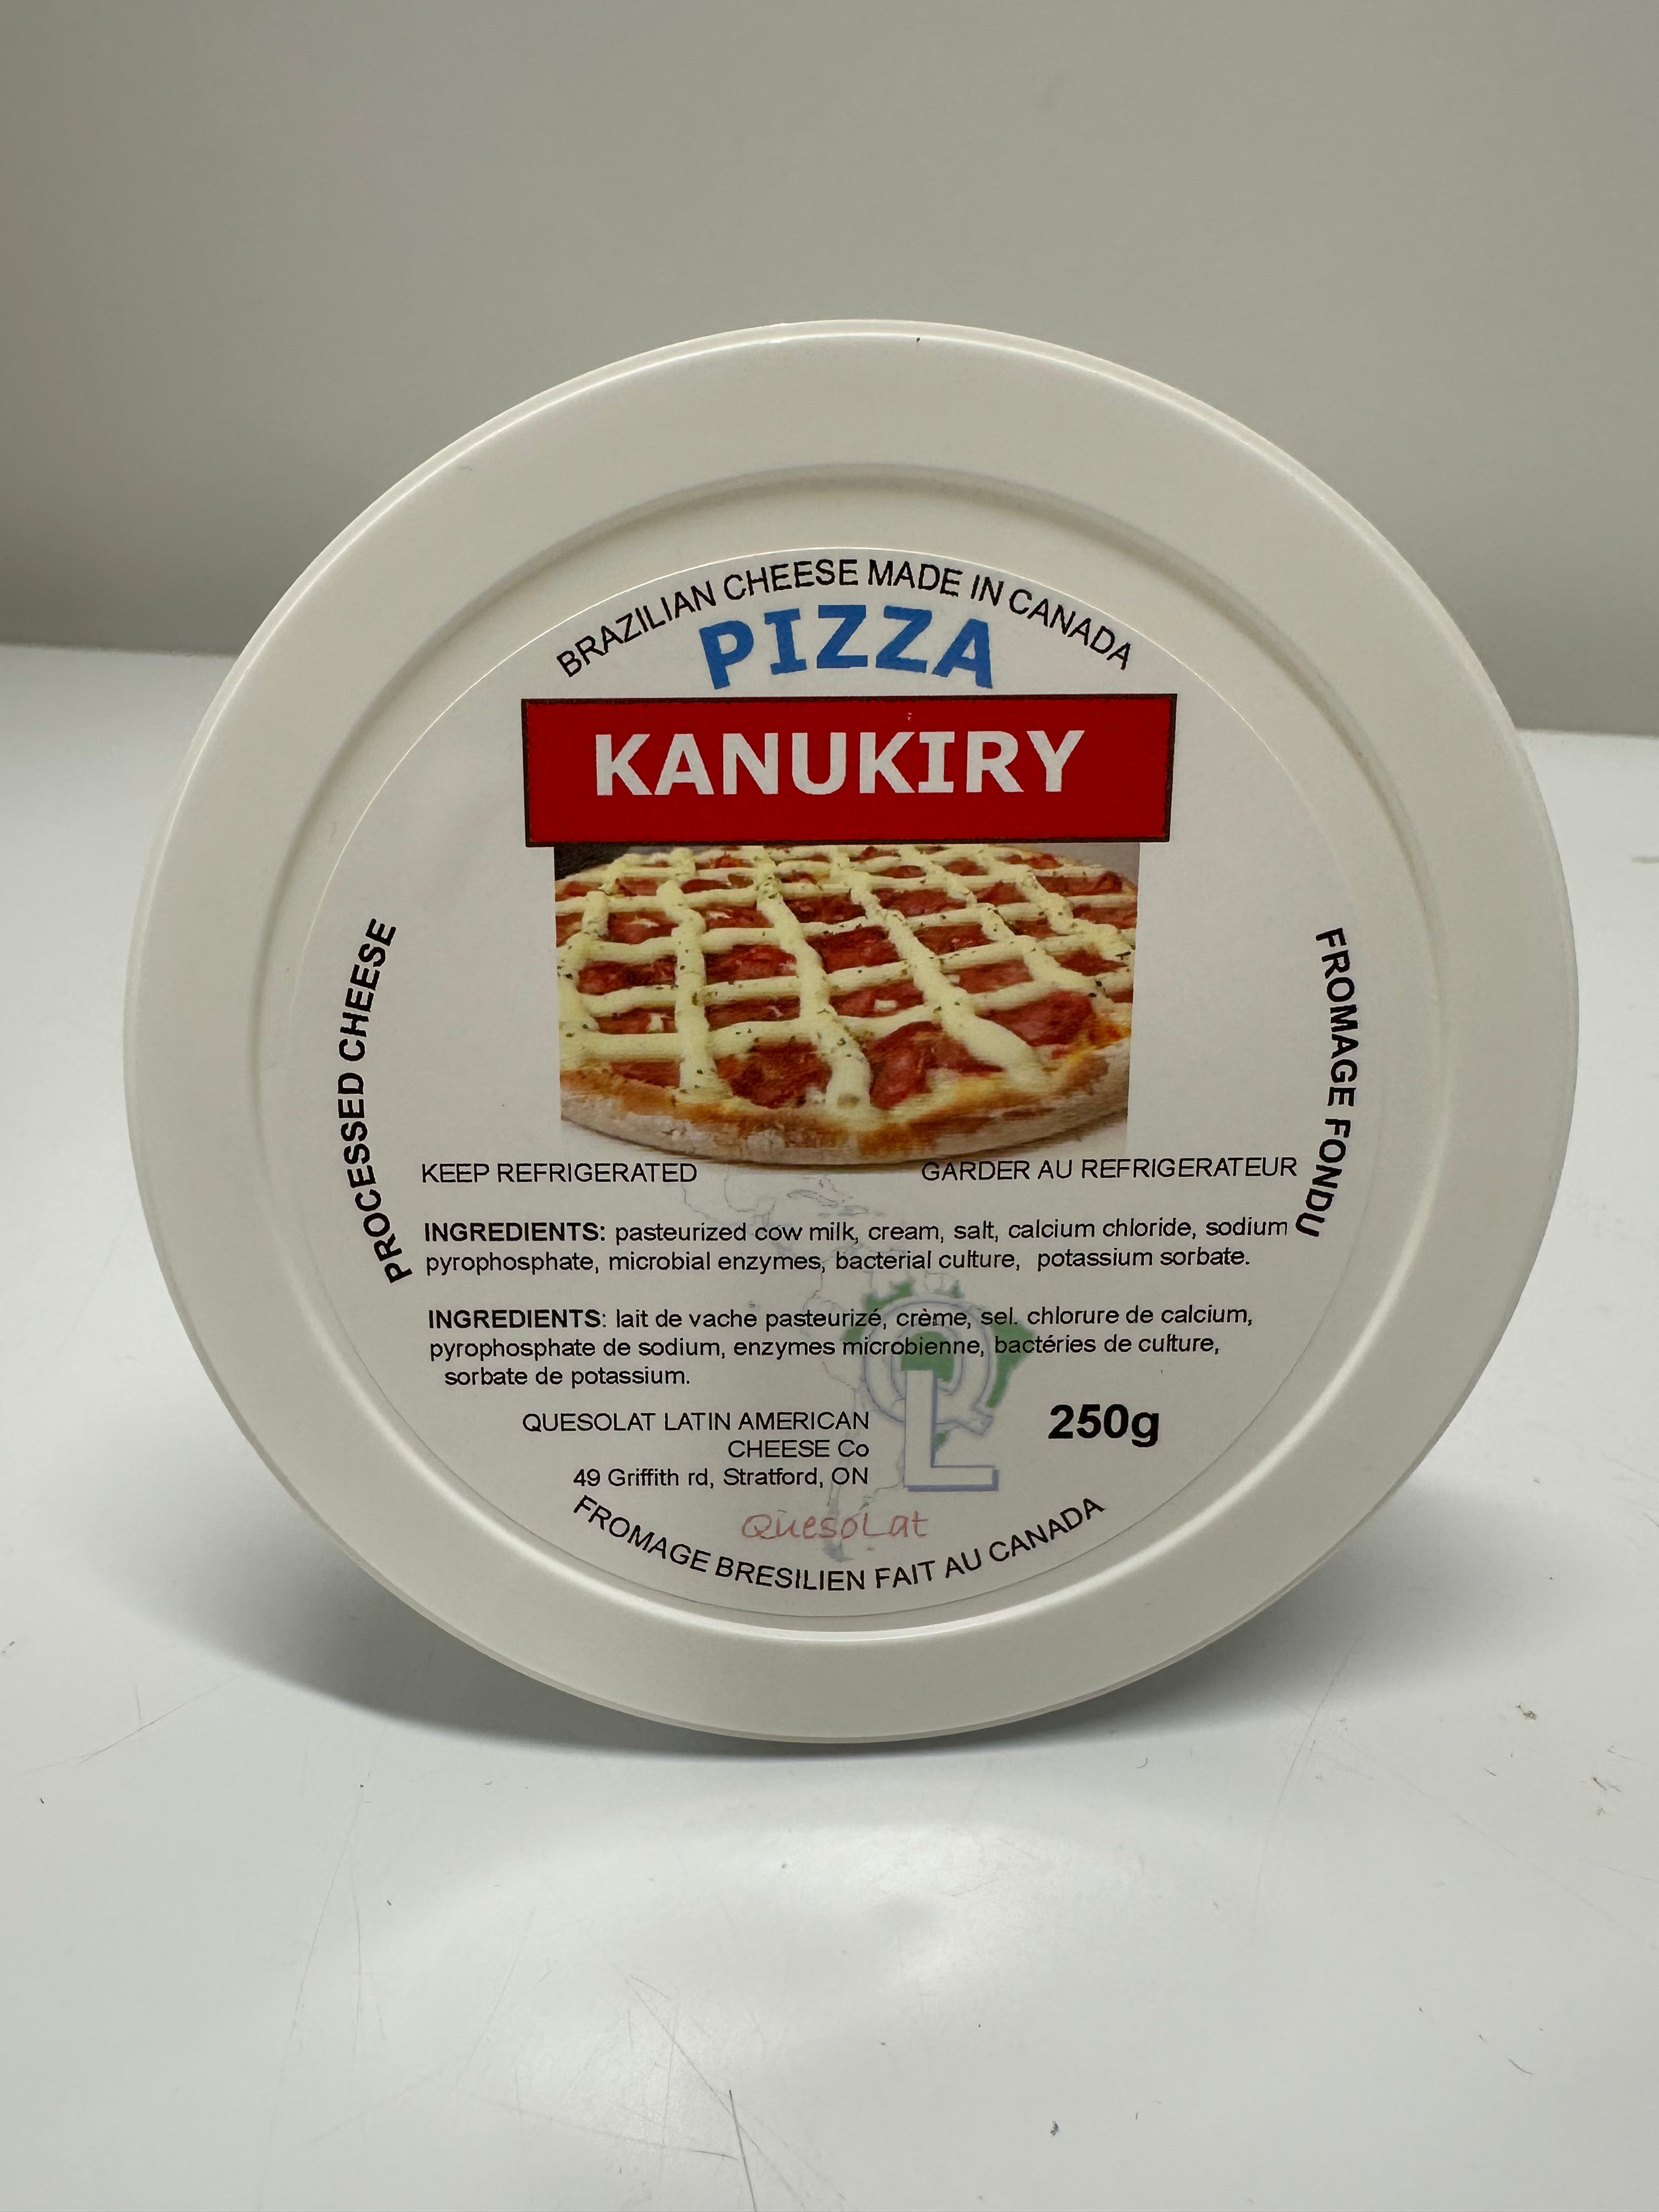 QUESOLAT - Kanukiry Pizza (Processed Cheese for Pizza) 250g